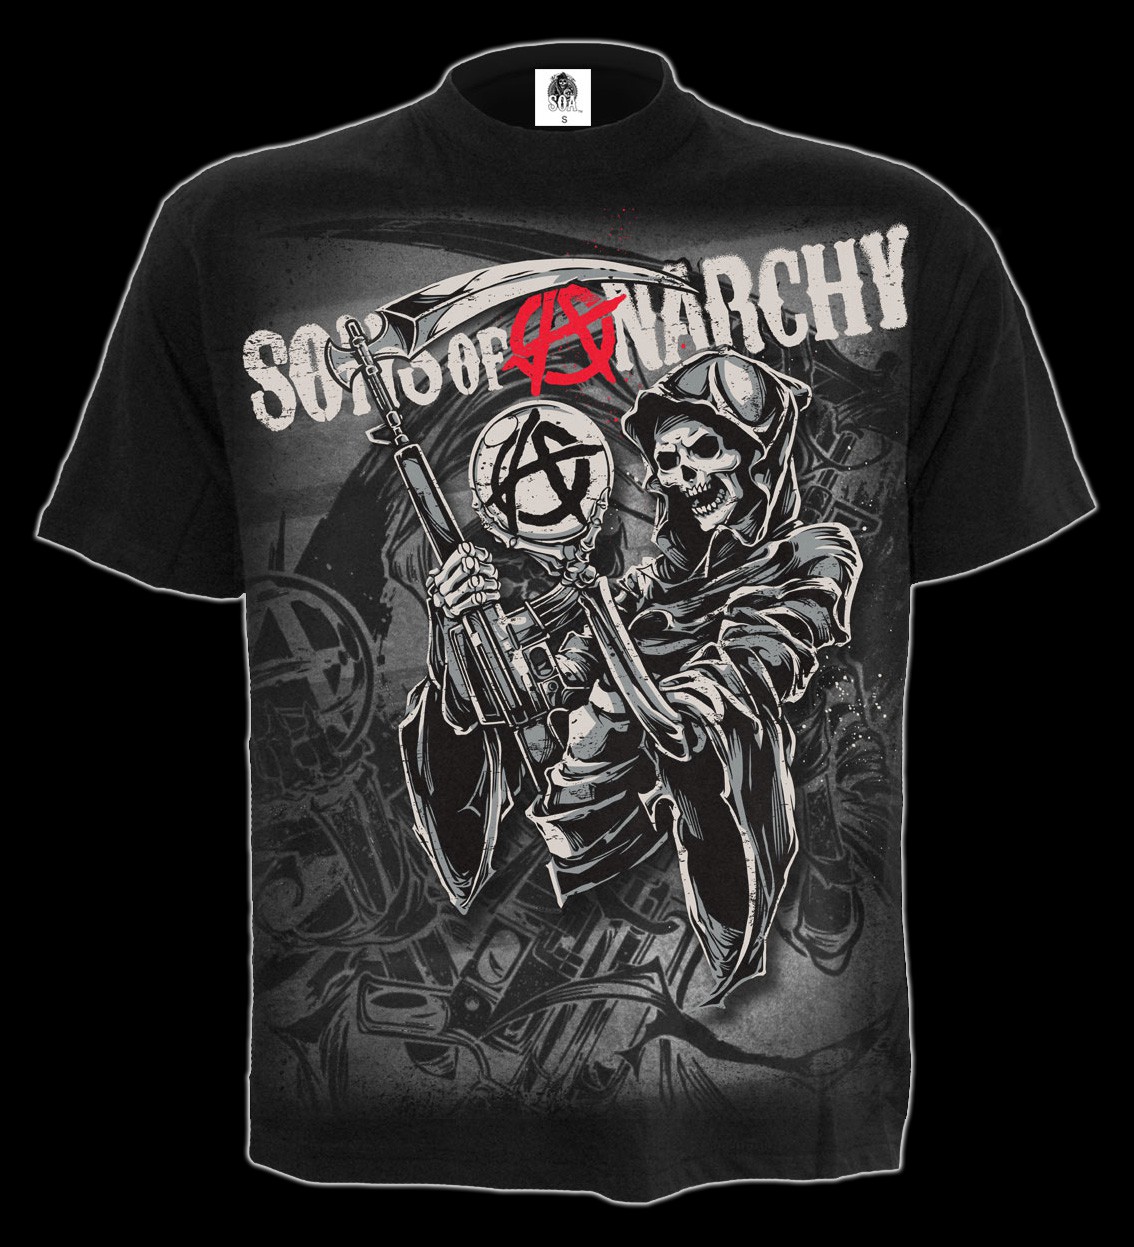 Samcro Reaper - Sons of Anarchy T-Shirt